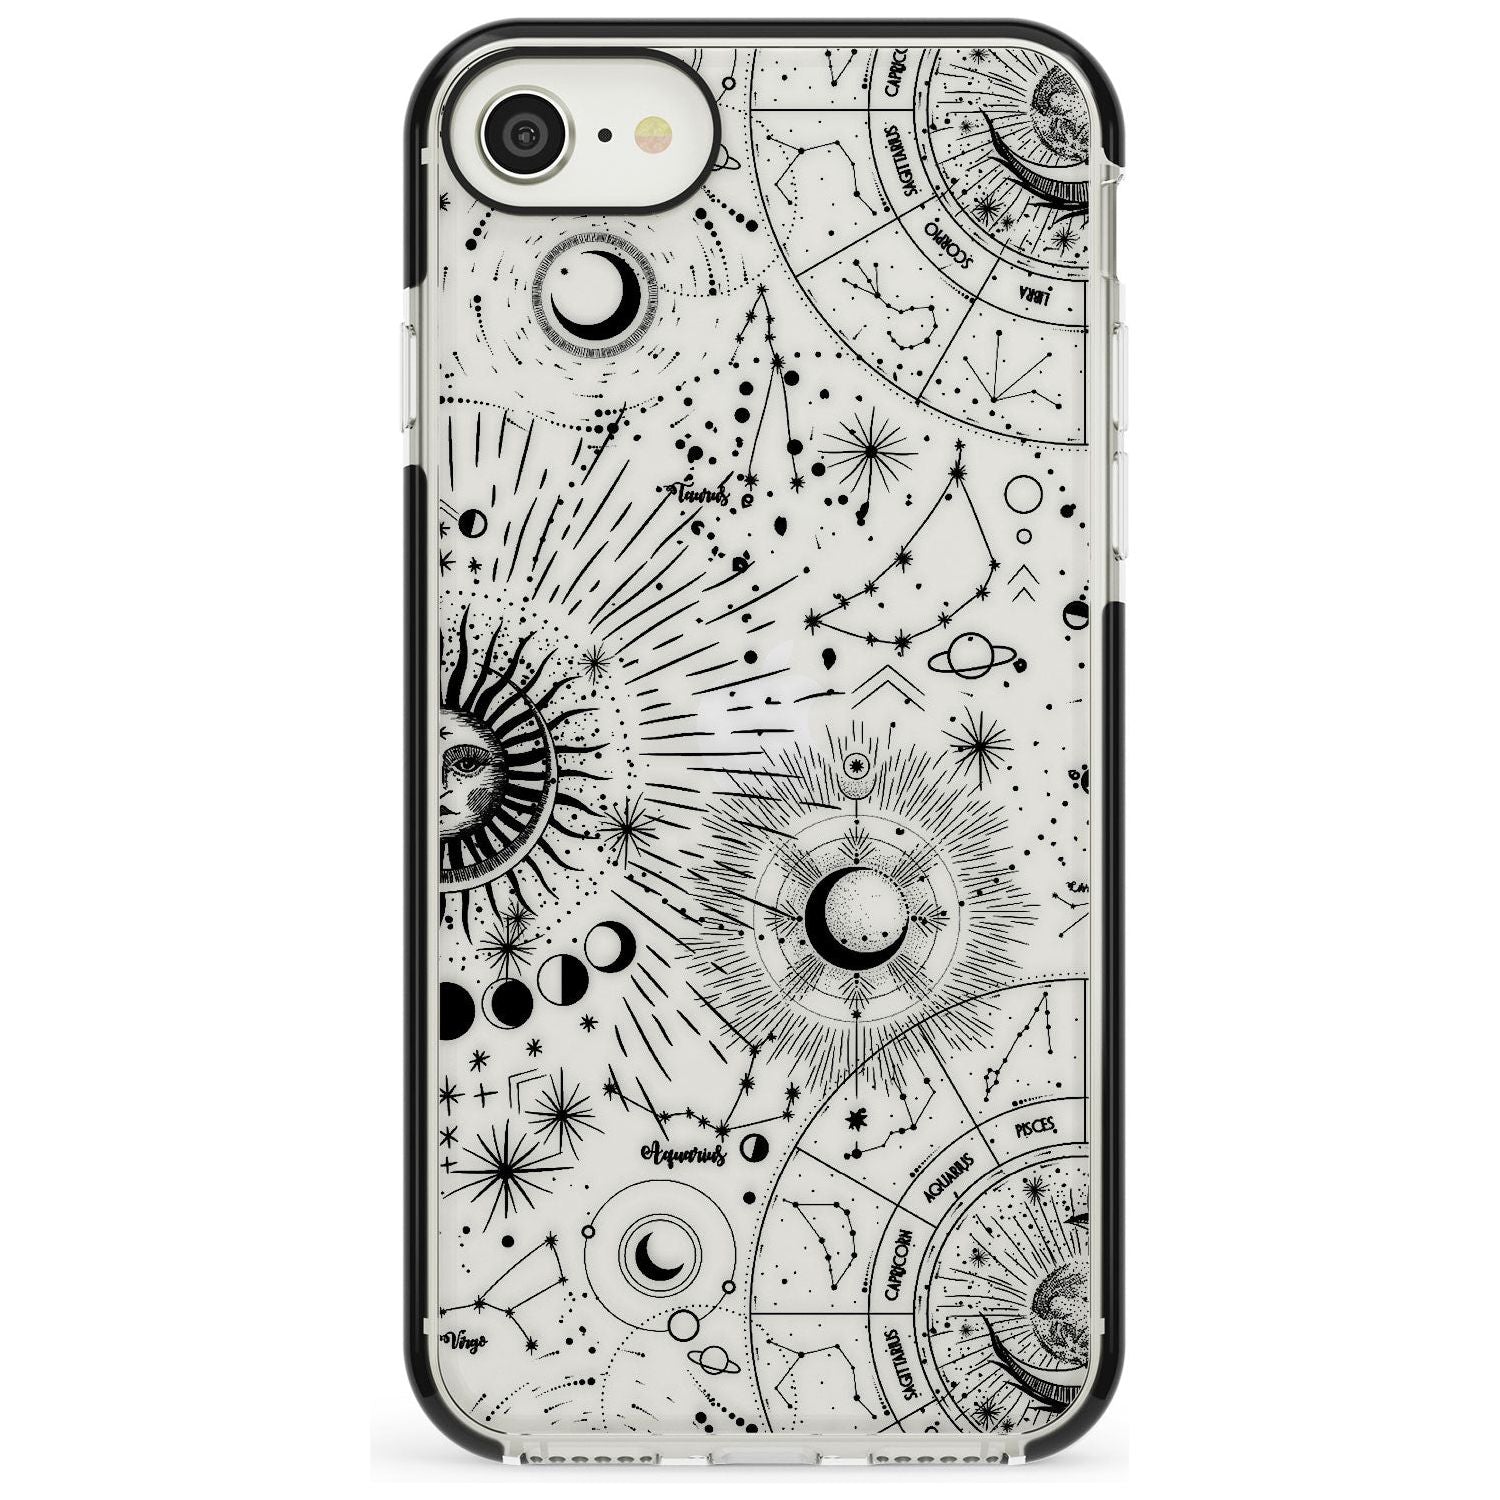 Suns & Constellations Astrological Black Impact Phone Case for iPhone SE 8 7 Plus